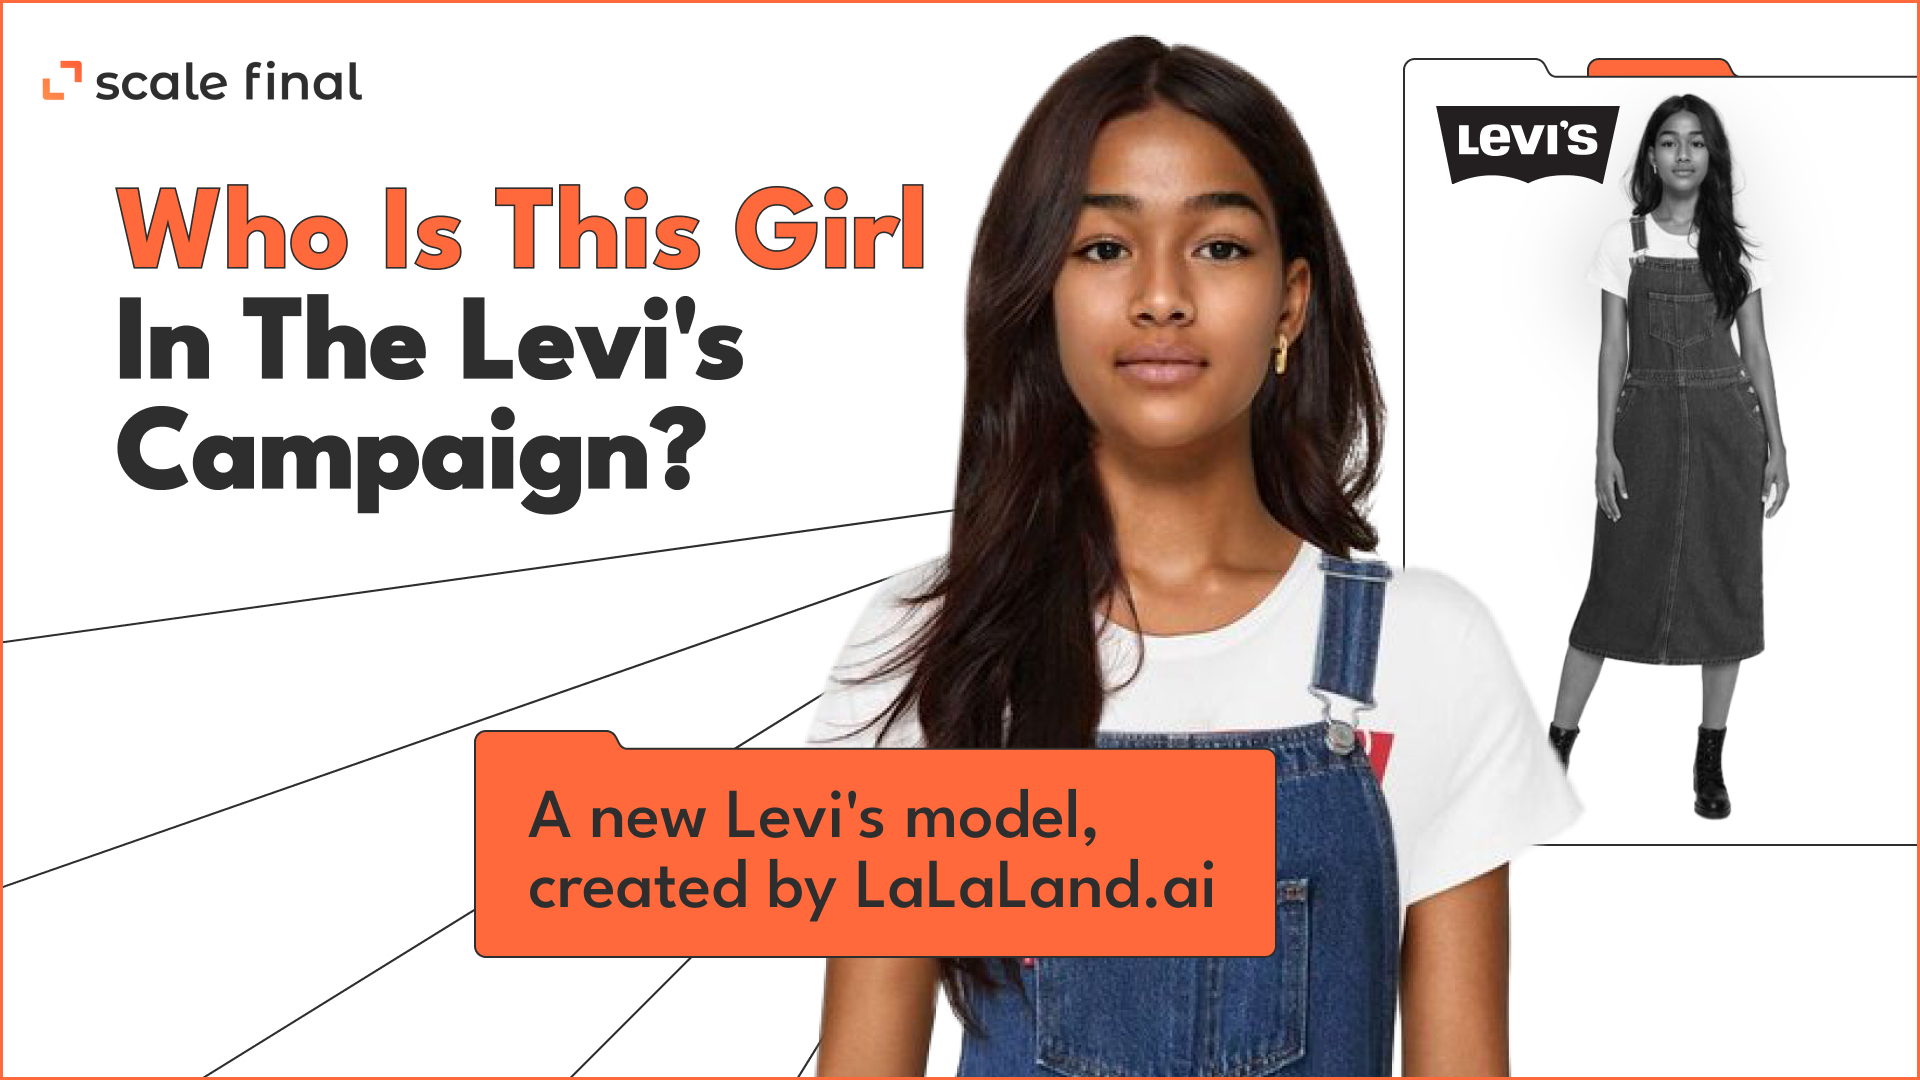 Who is this girl in the Levi's campaign?